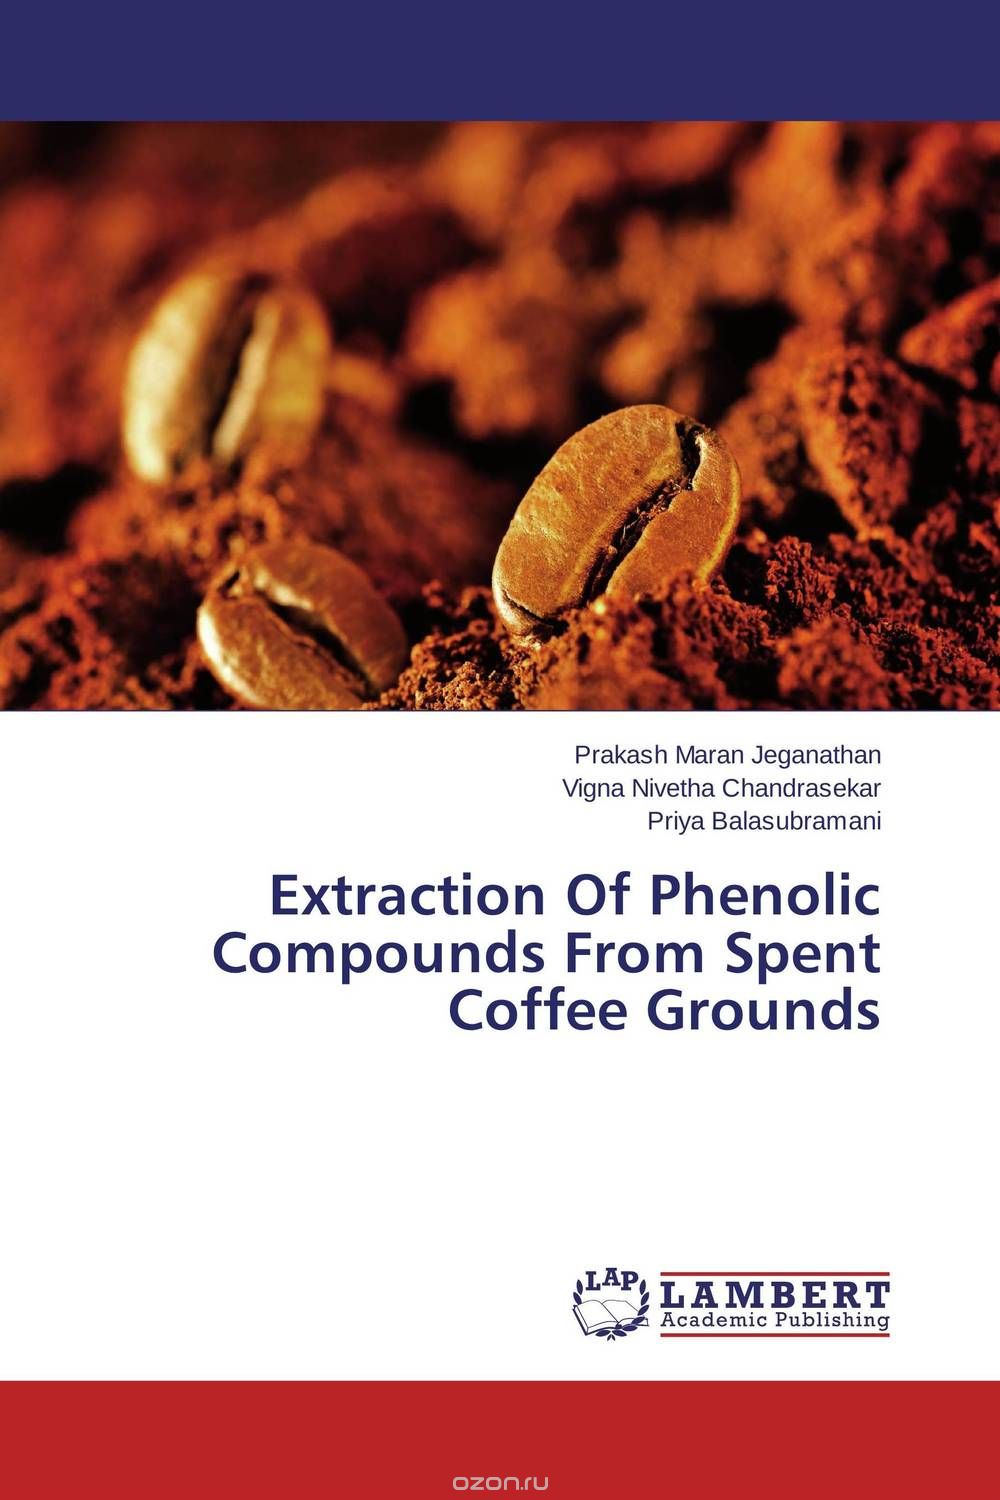 Extraction Of Phenolic Compounds From Spent Coffee Grounds